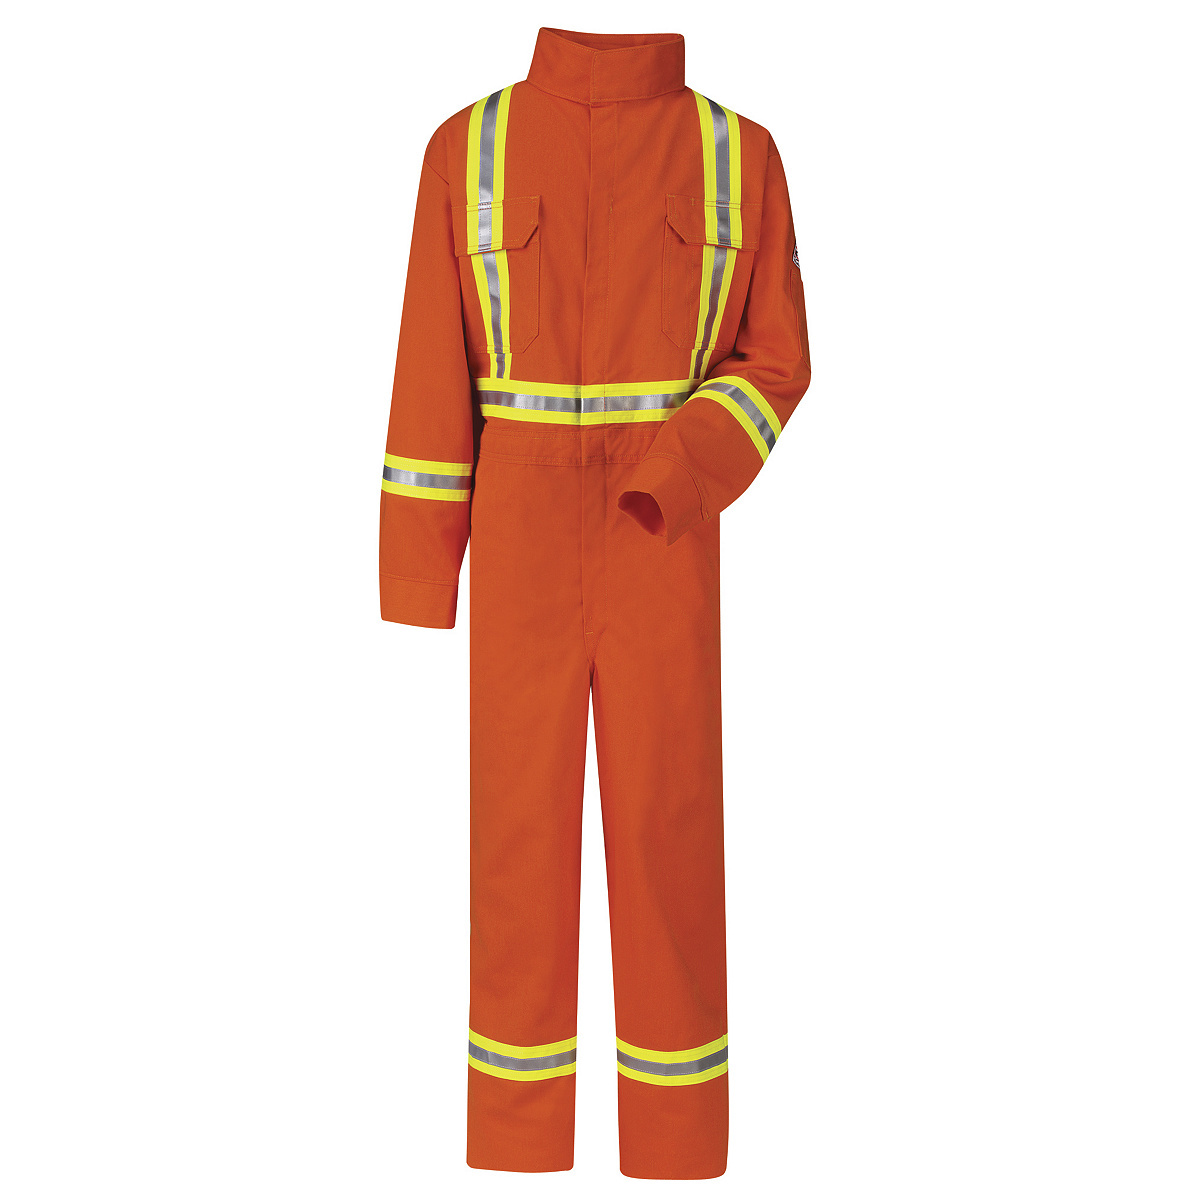 Bulwark® 58 Tall Orange Westex Ultrasoft® Twill/Cotton/Nylon Flame Resistant Coveralls With Zipper Front Closure And Reflective